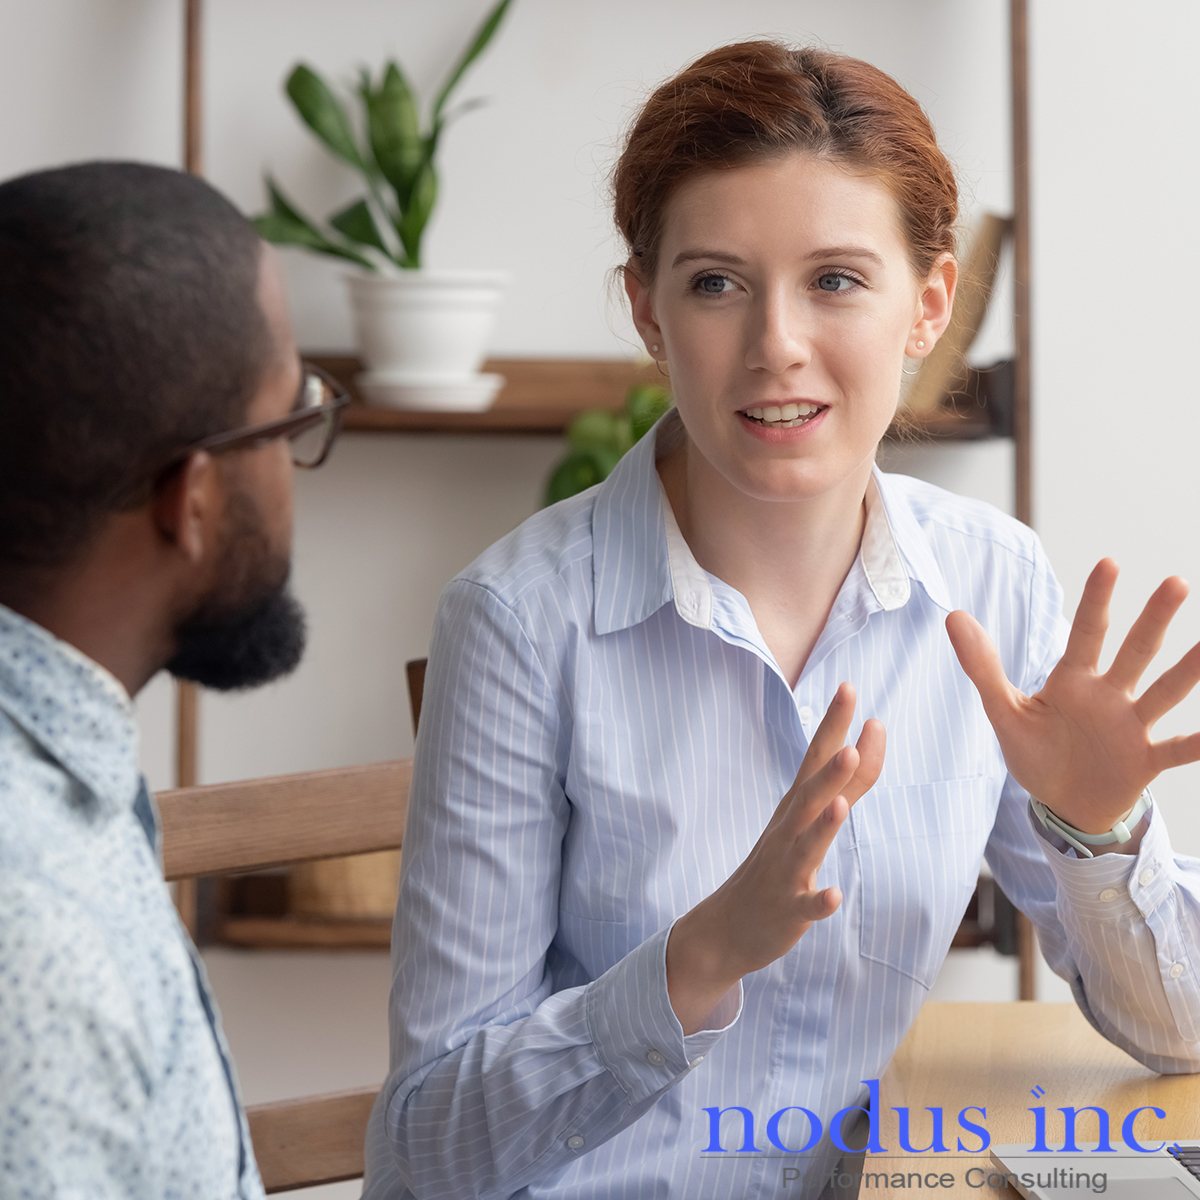 How to have a one-on-one meeting after layoffs Nodus Consulting